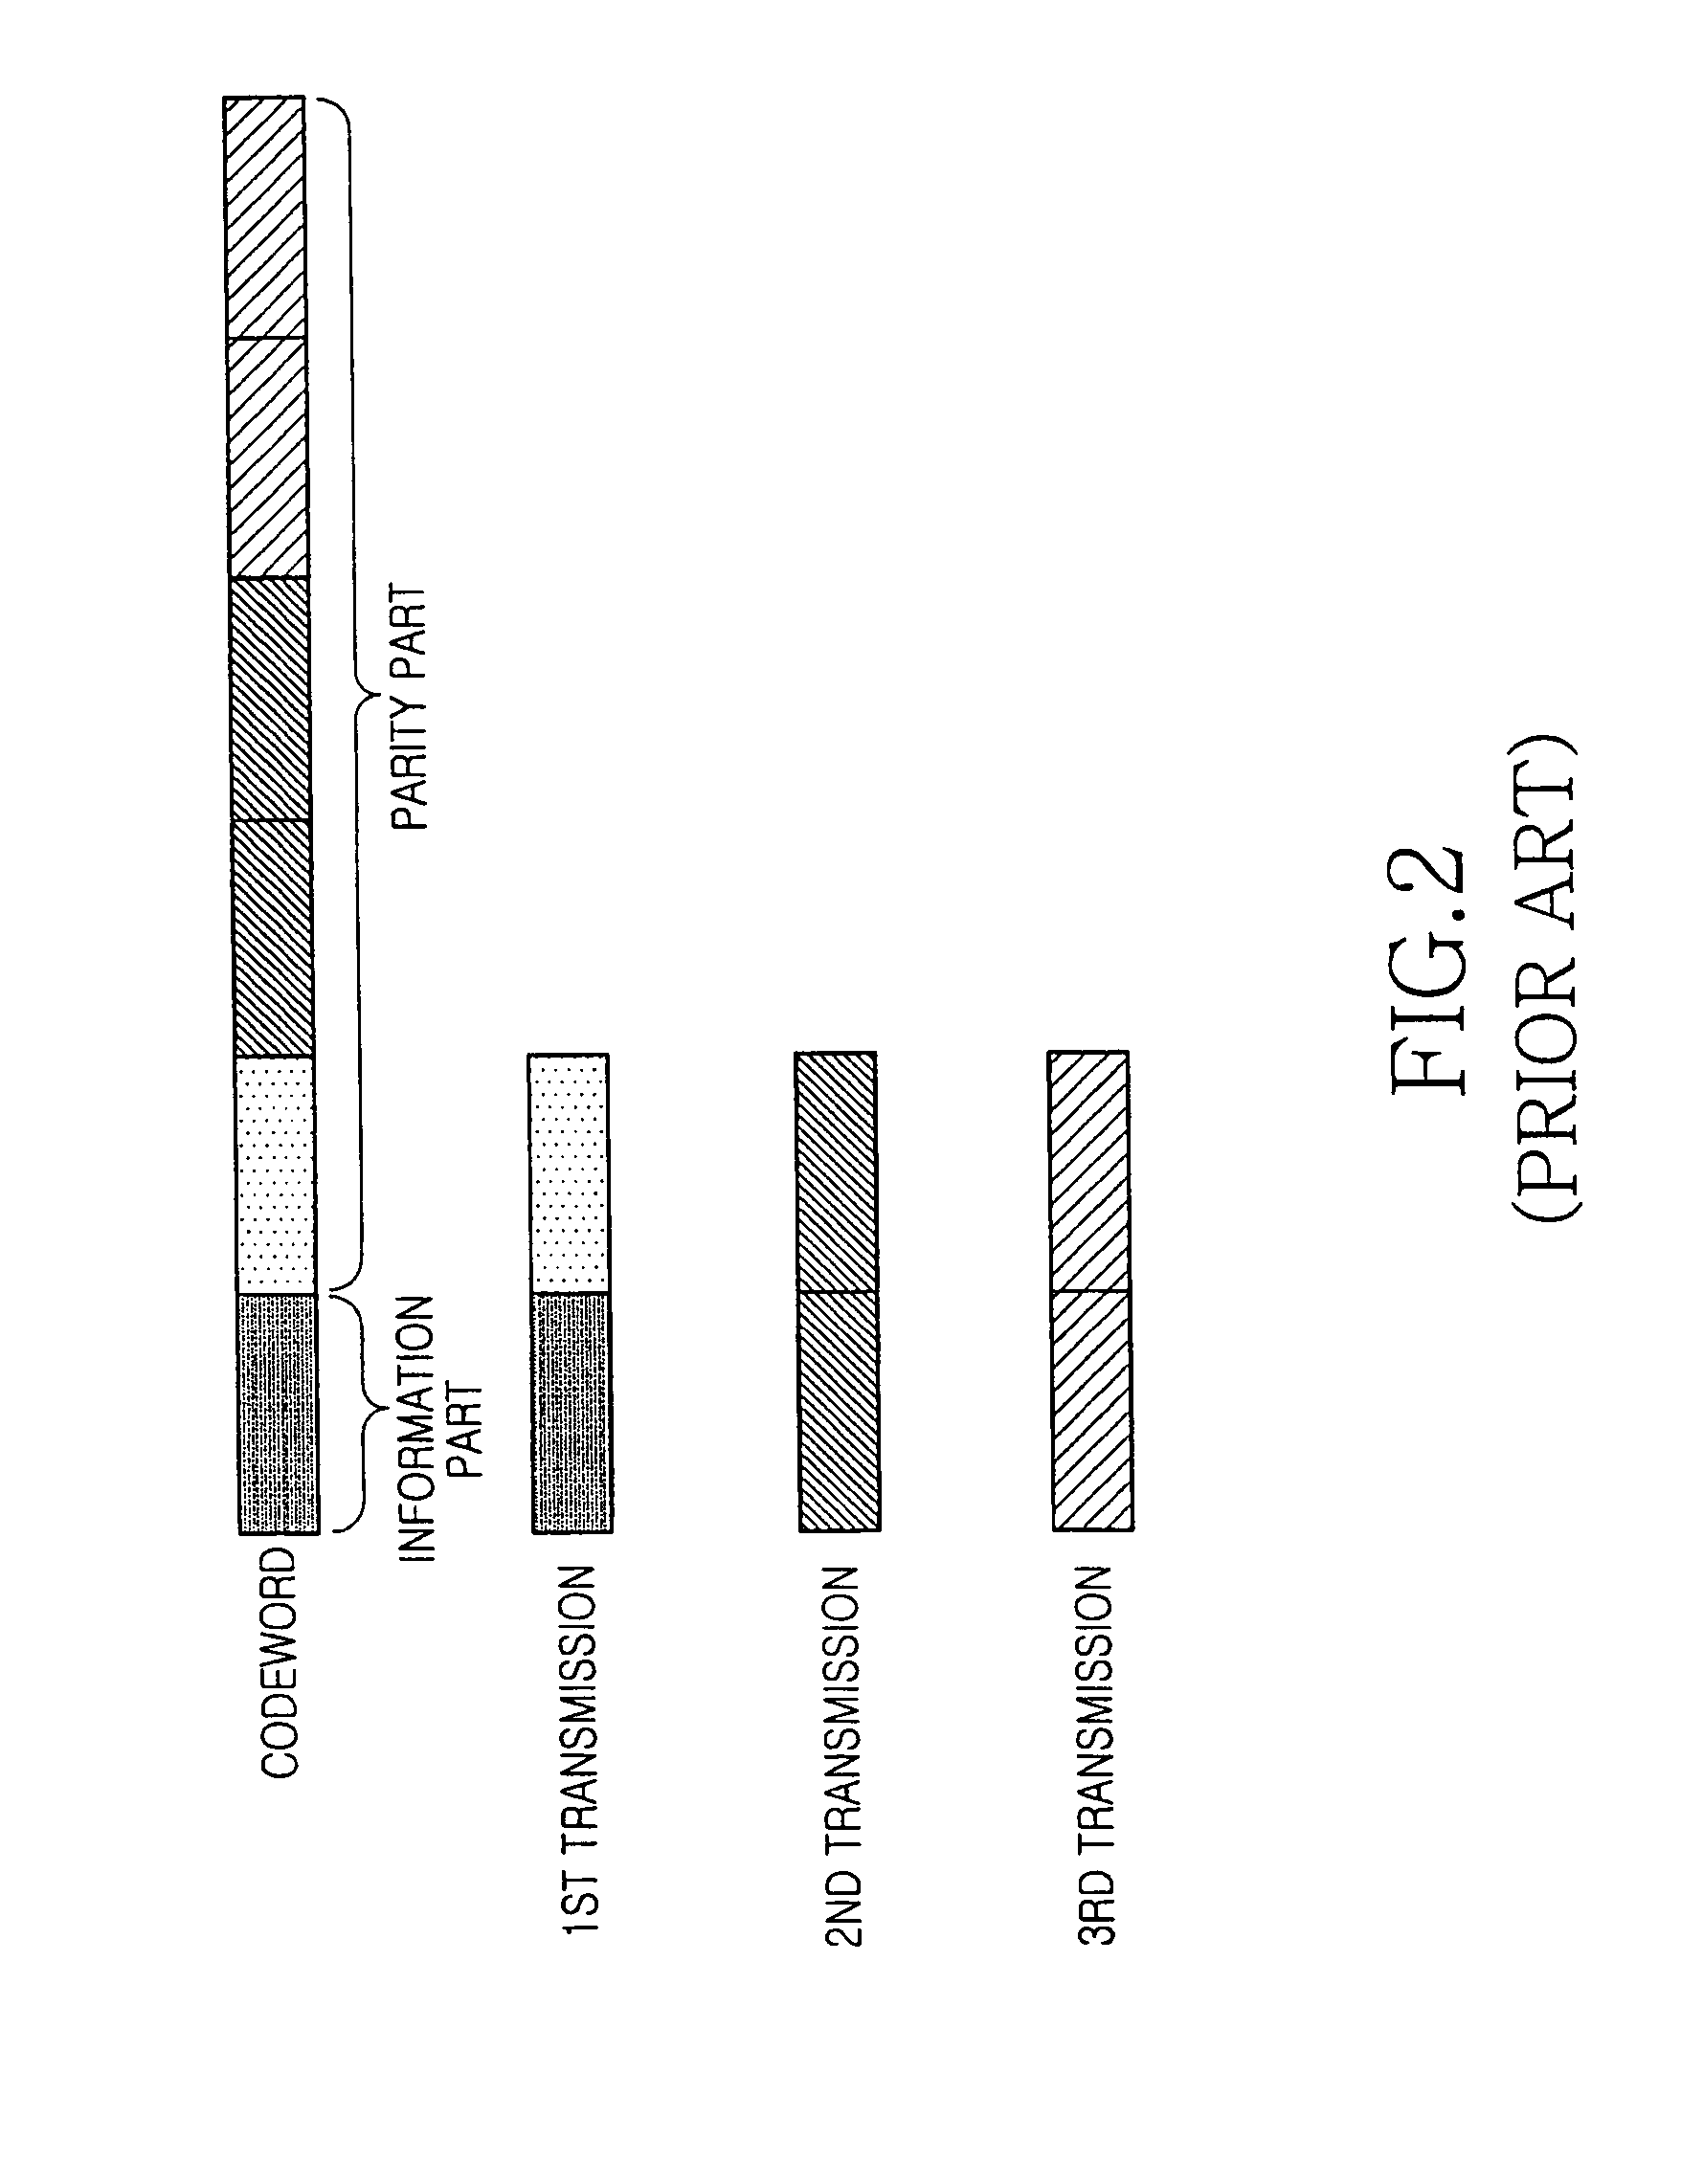 Apparatus and method for transmitting/receiving a signal in a communication system using a low density parity check code